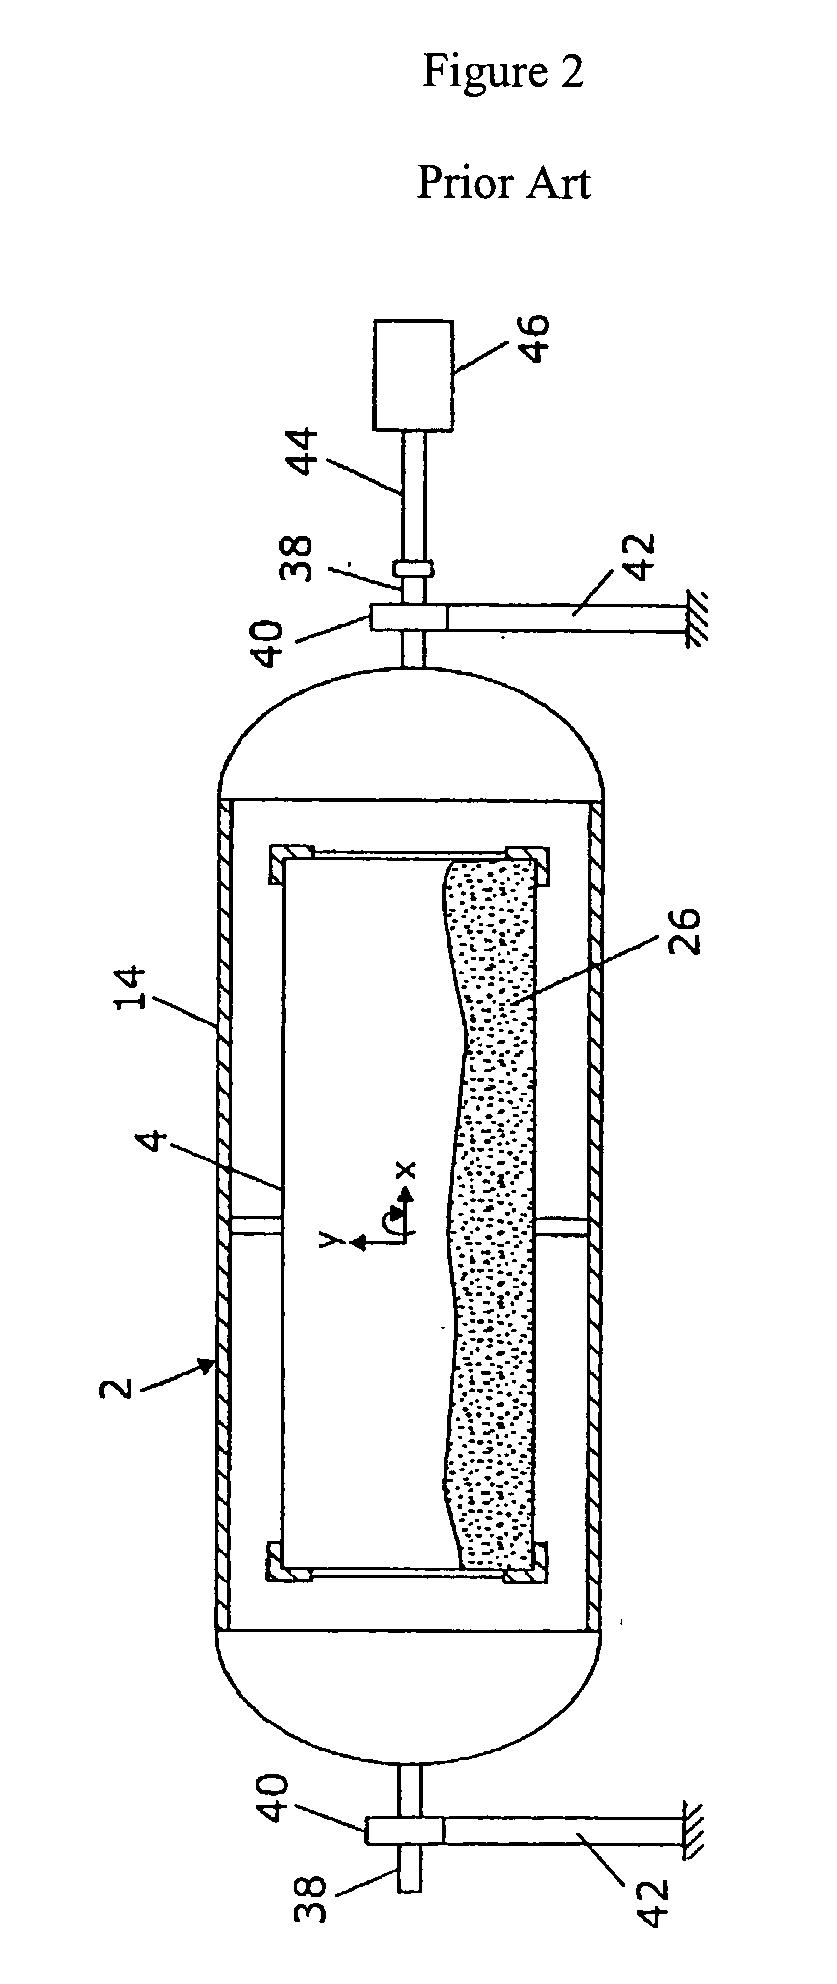 Dehydroxylation and purification of calcium fluoride materials using a halogen containing plasma